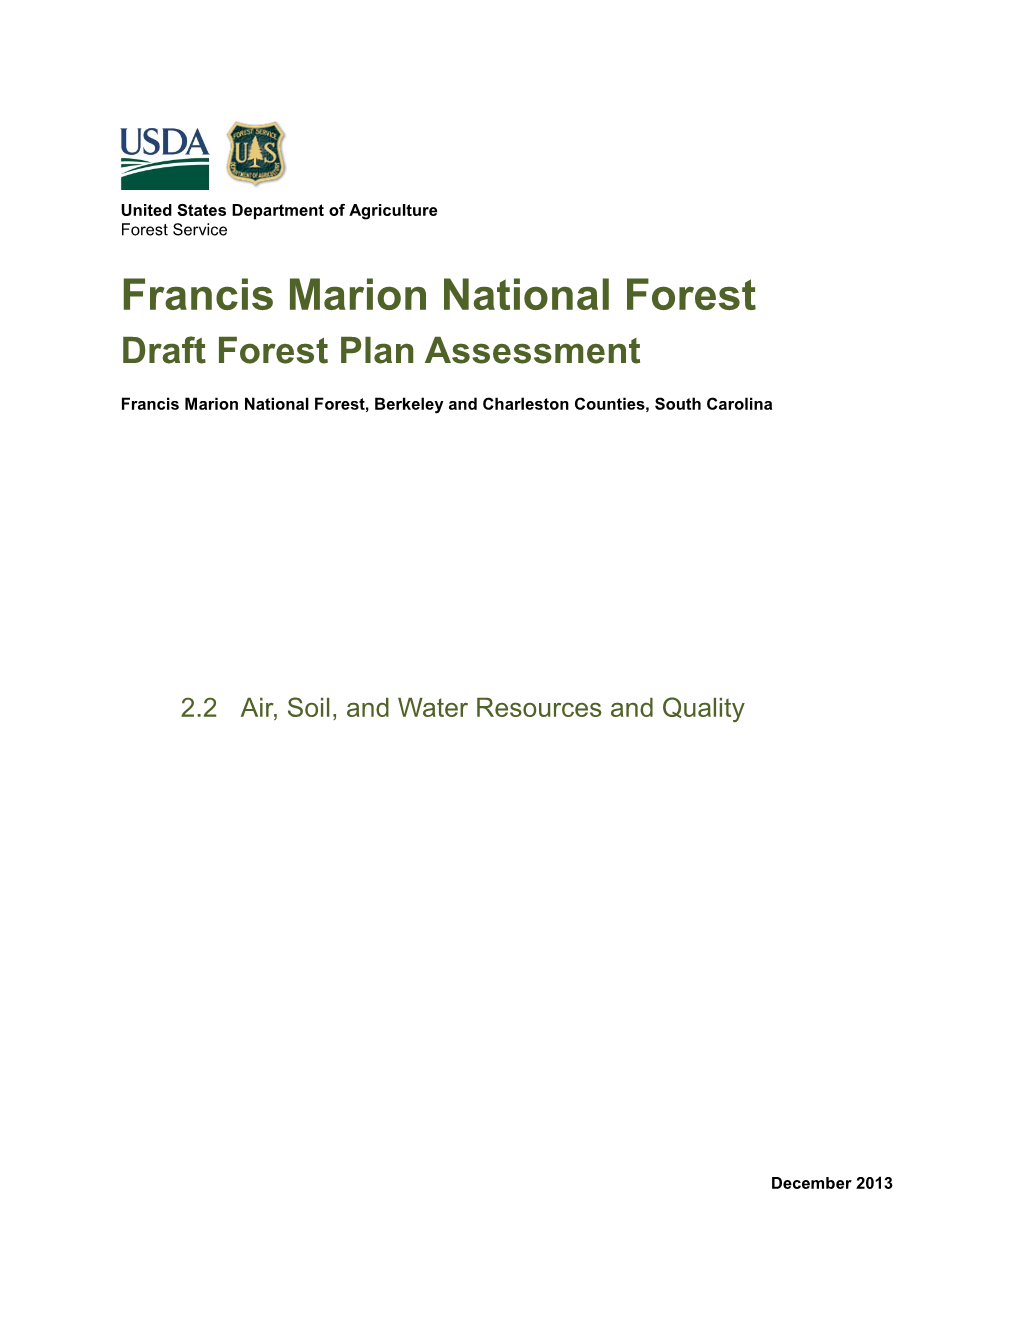 Francis Marion National Forest Draft Forest Plan Assessment